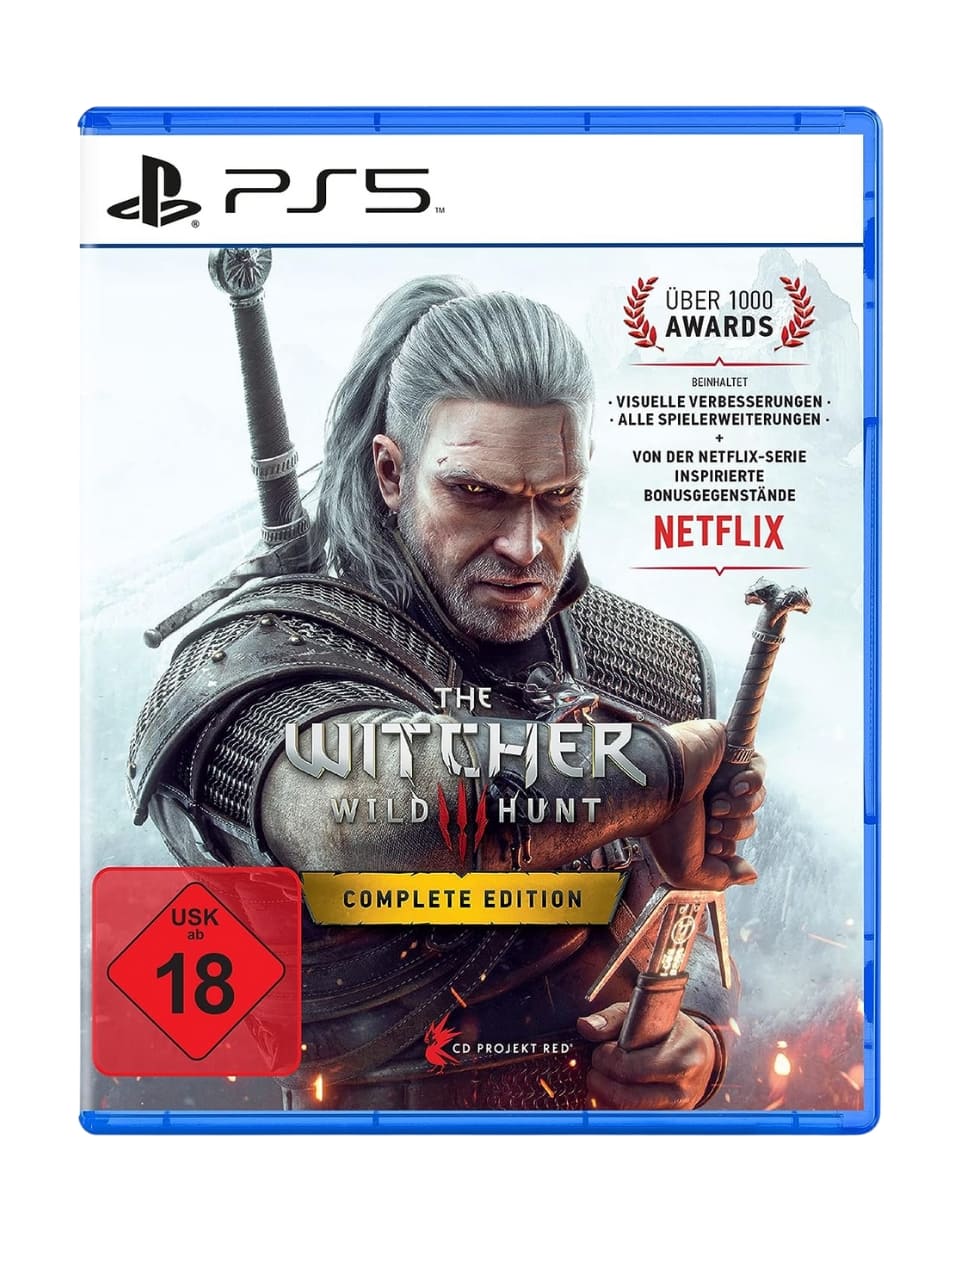 The Witcher 3: Wild Hunt (Complete Edition) - PlayStation 5/PS5